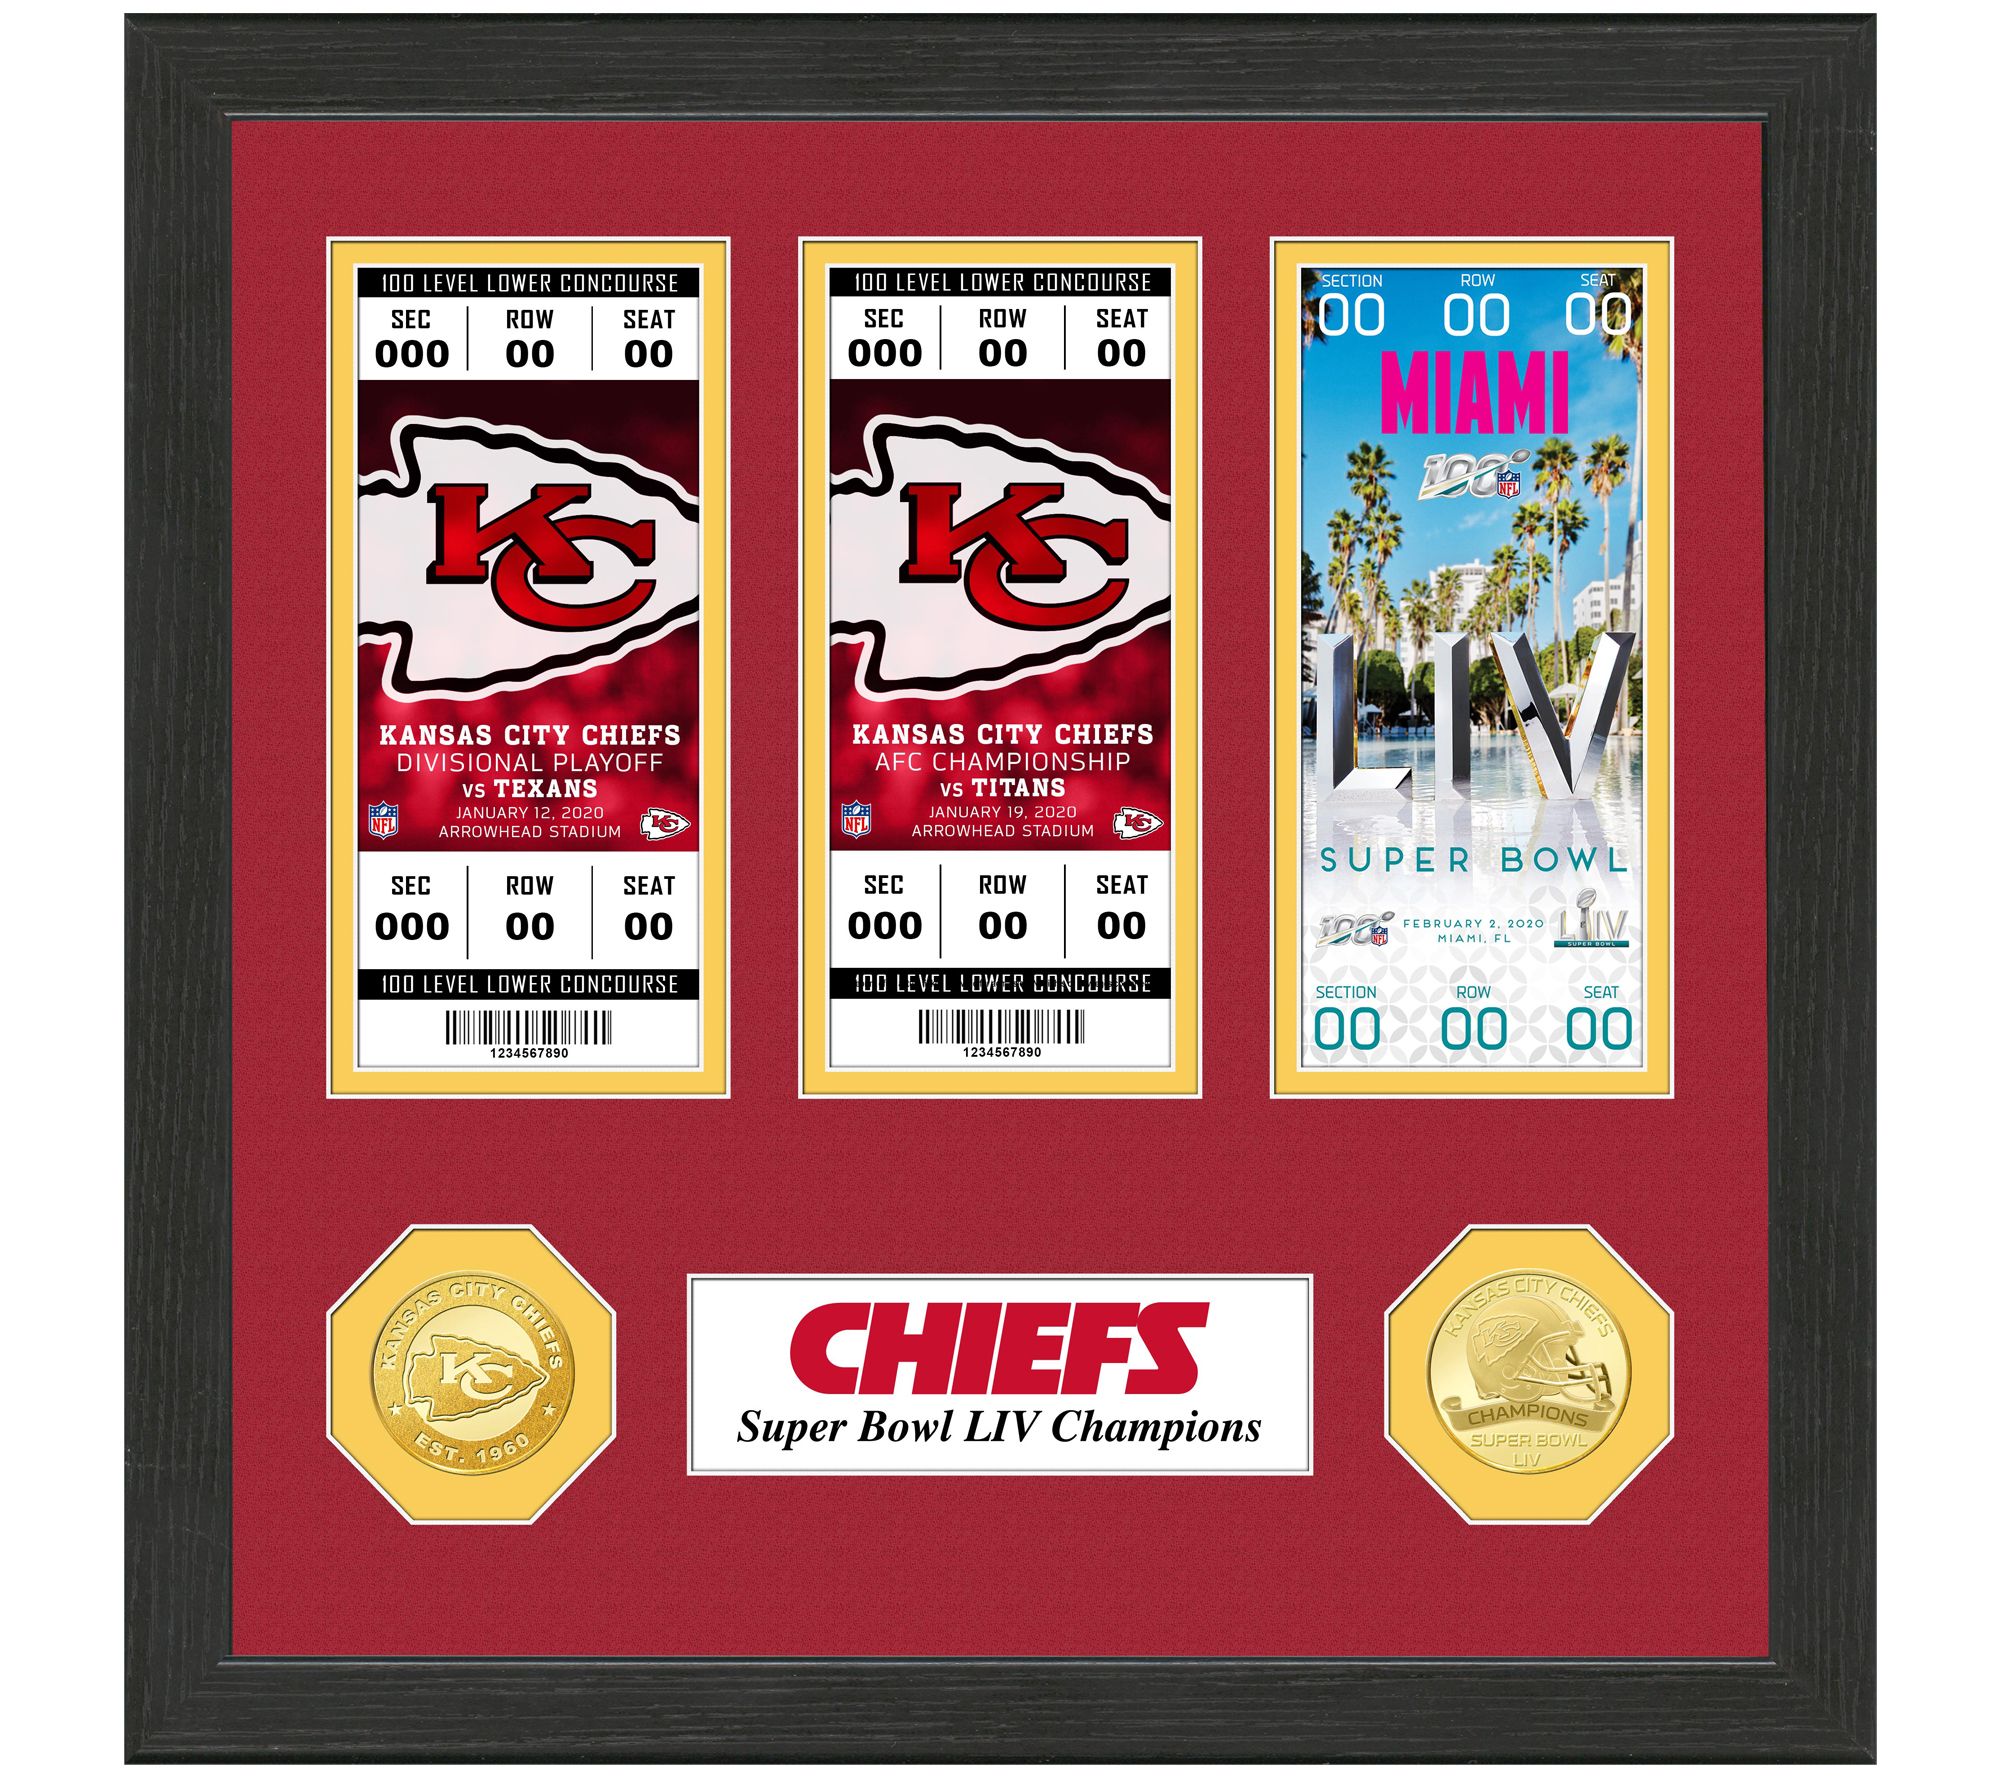 Kansas City Chiefs Road to Super Bowl 54 TicketCollection 